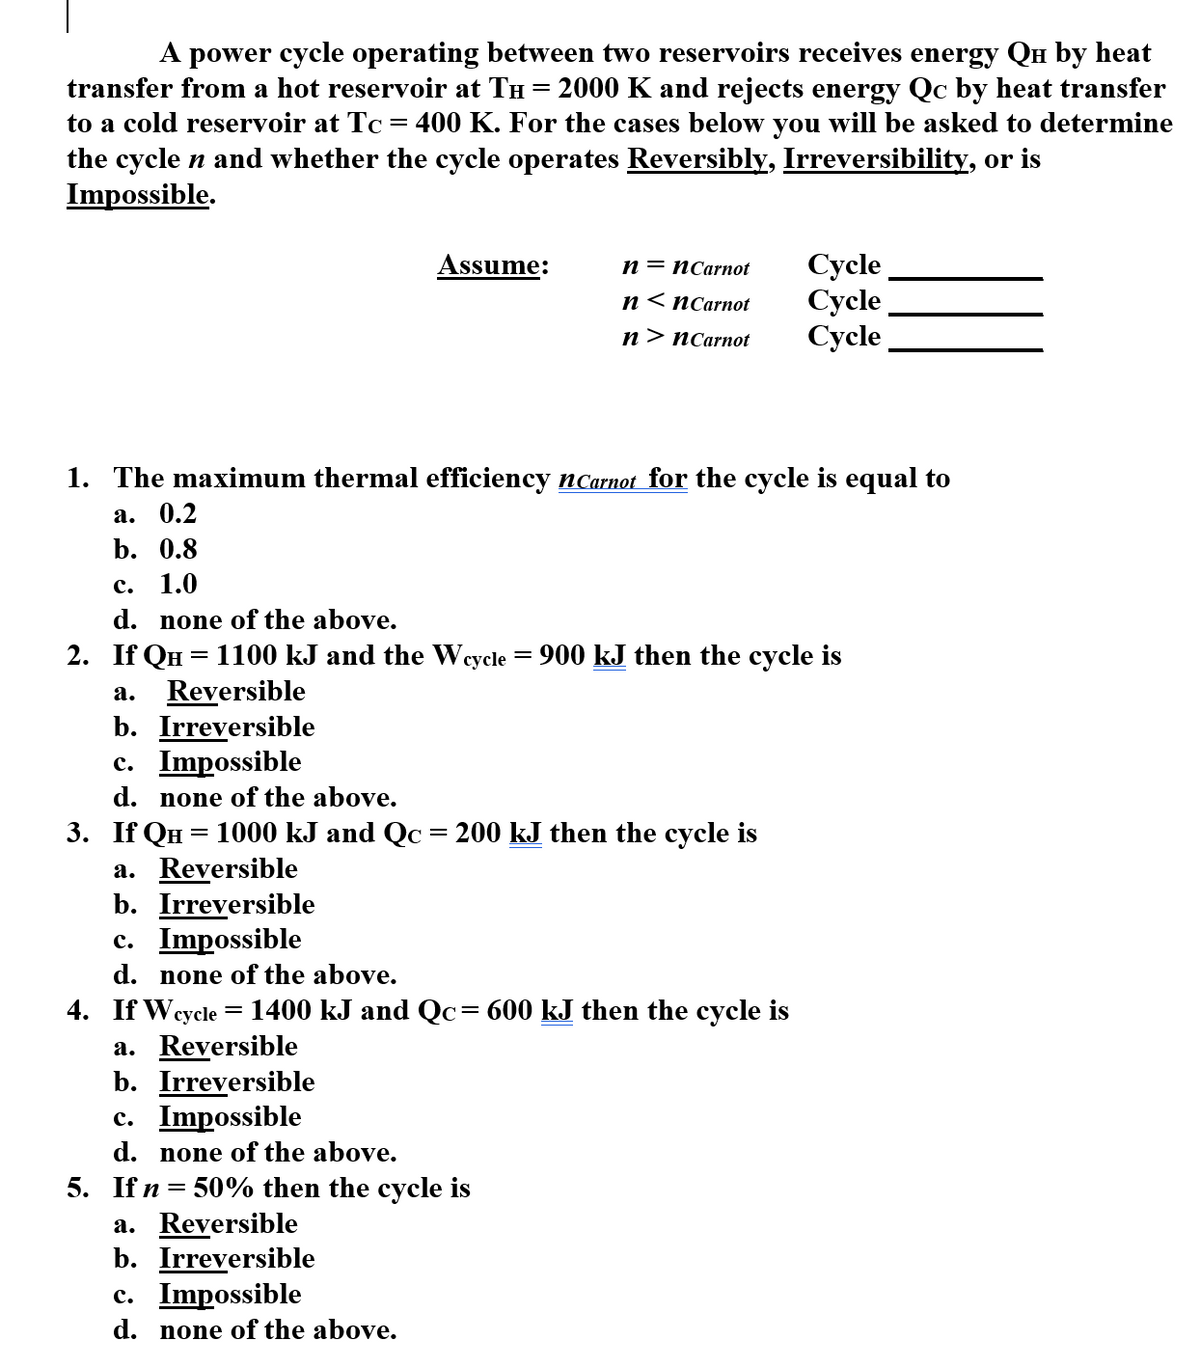 A power cycle operating between two reservoirs receives energy Qu by heat
transfer from a hot reservoir at TH = 2000 K and rejects energy Qc by heat transfer
to a cold reservoir at Tc = 400 K. For the cases below you will be asked to determine
the cycle n and whether the cycle operates Reversibly, Irreversibility, or is
Impossible.
Сycle
Сycle
Сycle
Assume:
п — пСarnot
n< пСarnot
п > пСarnot
1. The maximum thermal efficiency nCarnot for the cycle is equal to
а. 0.2
b. 0.8
с.
1.0
d. none of the above.
2. If QH = 1100 kJ and the Weycle = 900 kJ then the cycle is
Reversible
b. Irreversible
c. Impossible
а.
d.
none of the above.
3. If QH = 1000 kJ and Qc = 200 kJ then the cycle is
a. Reversible
b. Irreversible
c. Impossible
d. none of the above.
4. If Wq
a. Reversible
b. Irreversible
c. Impossible
d. none of the above.
суcle
1400 kJ and Qc= 600 kJ then the cycle is
5. If n = 50% then the cycle is
a. Reversible
b. Irreversible
c. Impossible
d. none of the above.
